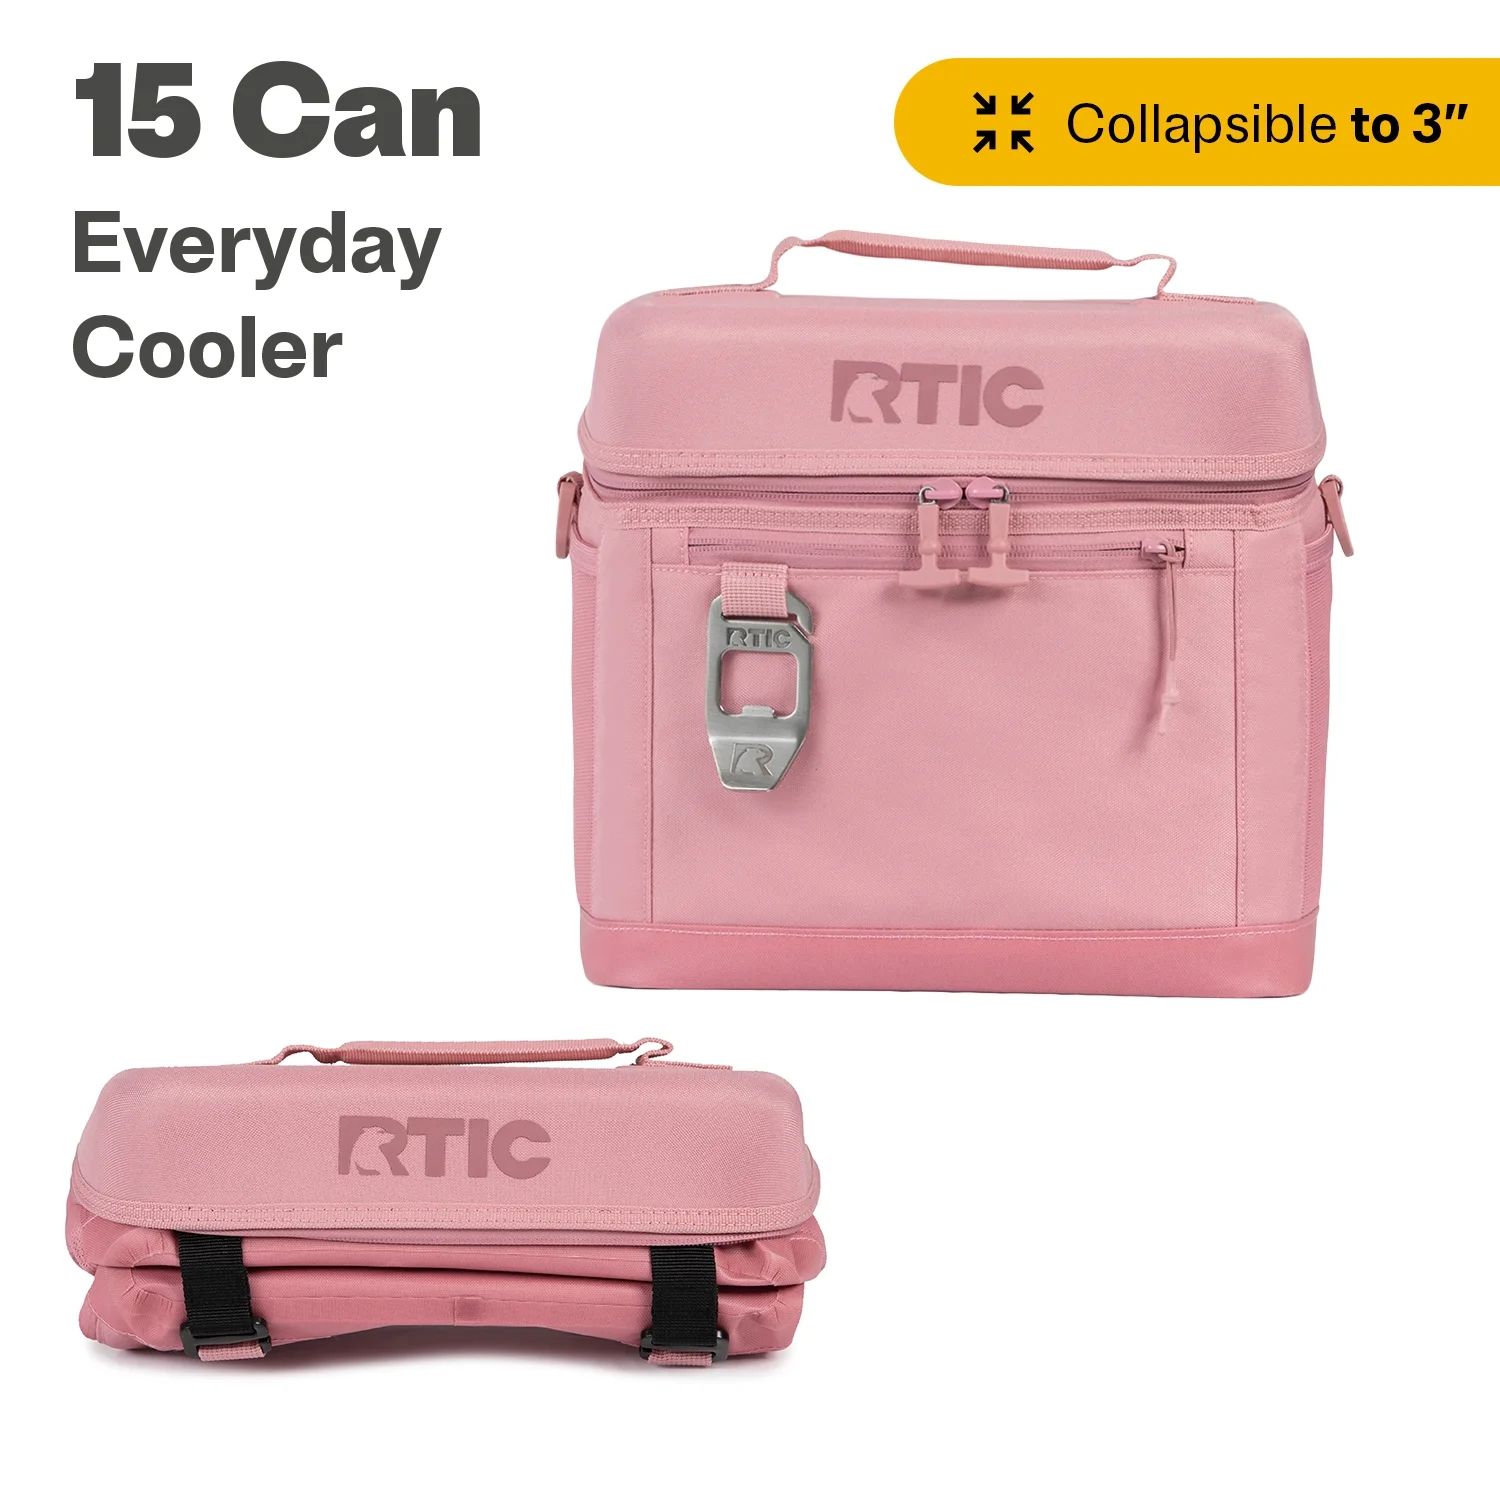 RTIC 15 Can Everyday Cooler, Insulated Soft Cooler with Collapsible Design, Dusty Rose | Walmart (US)